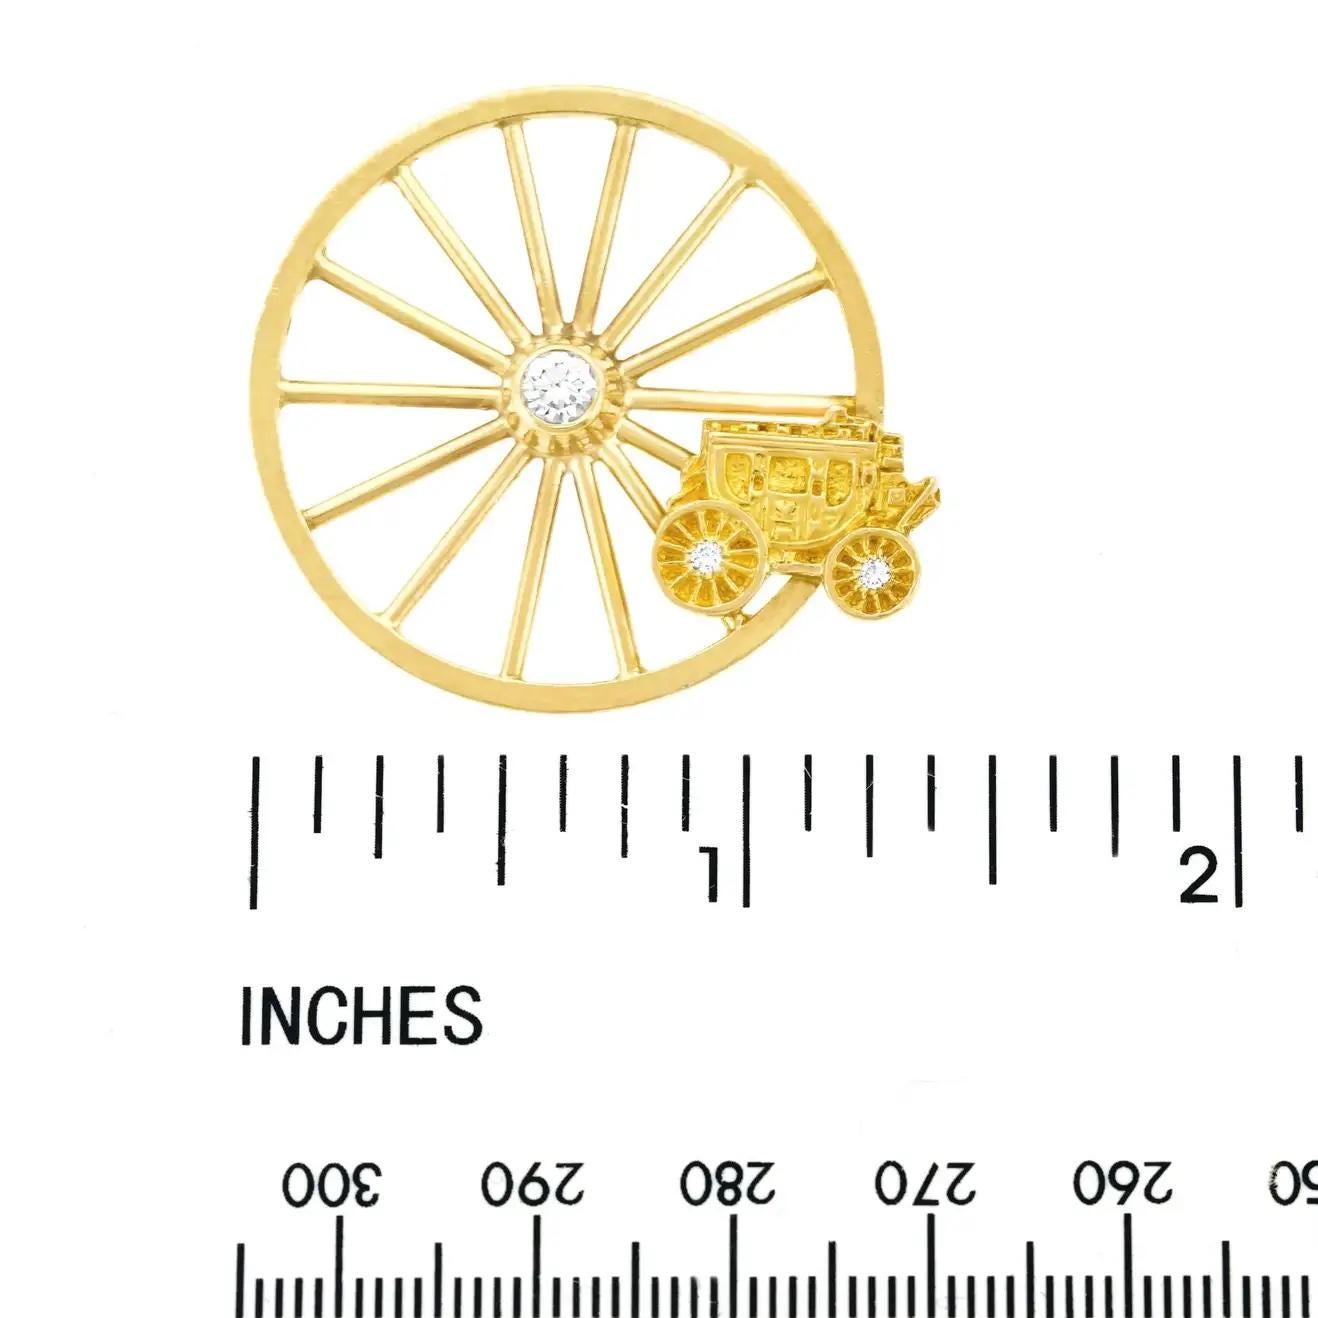 how old is the gold stagecoach